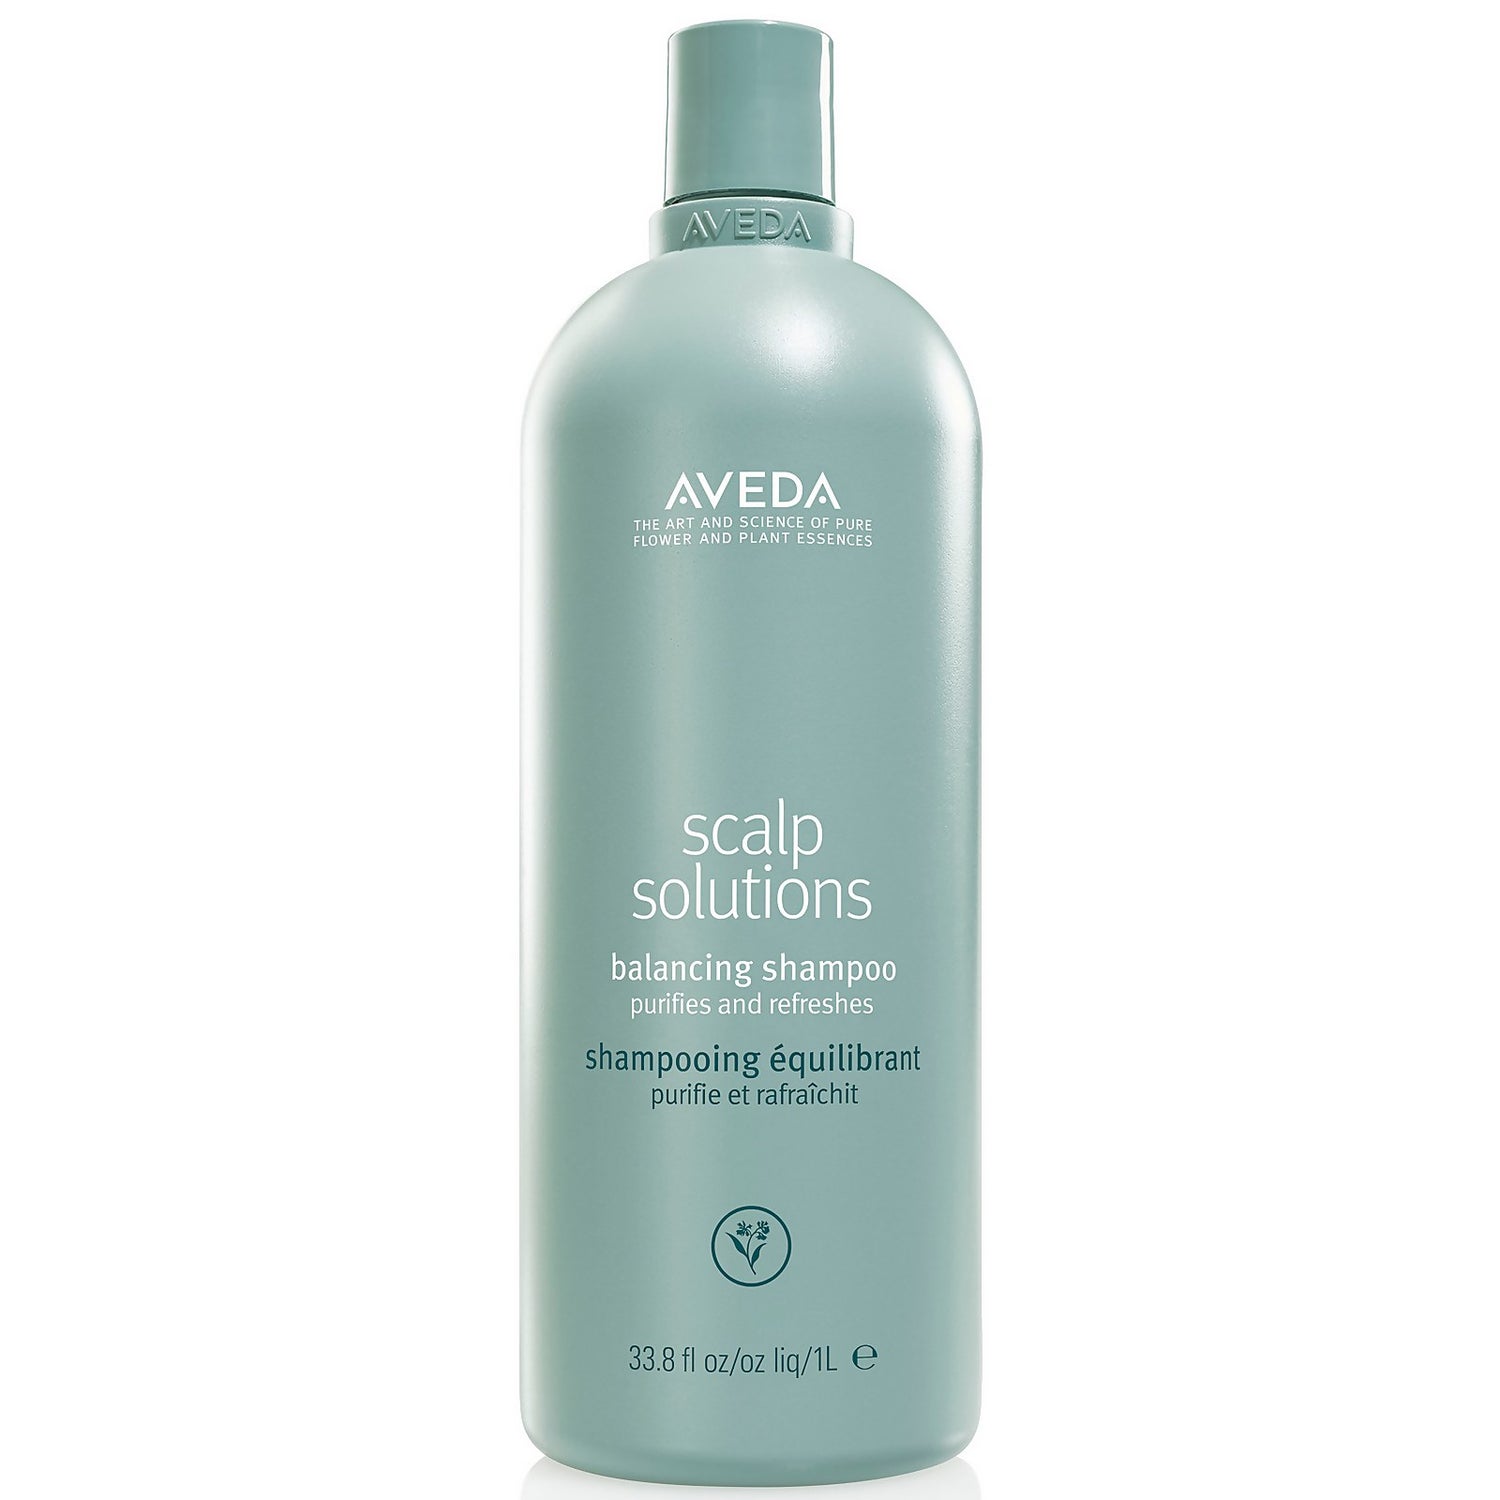 Aveda shampoo riequilibrante Scalp Solutions 1 l